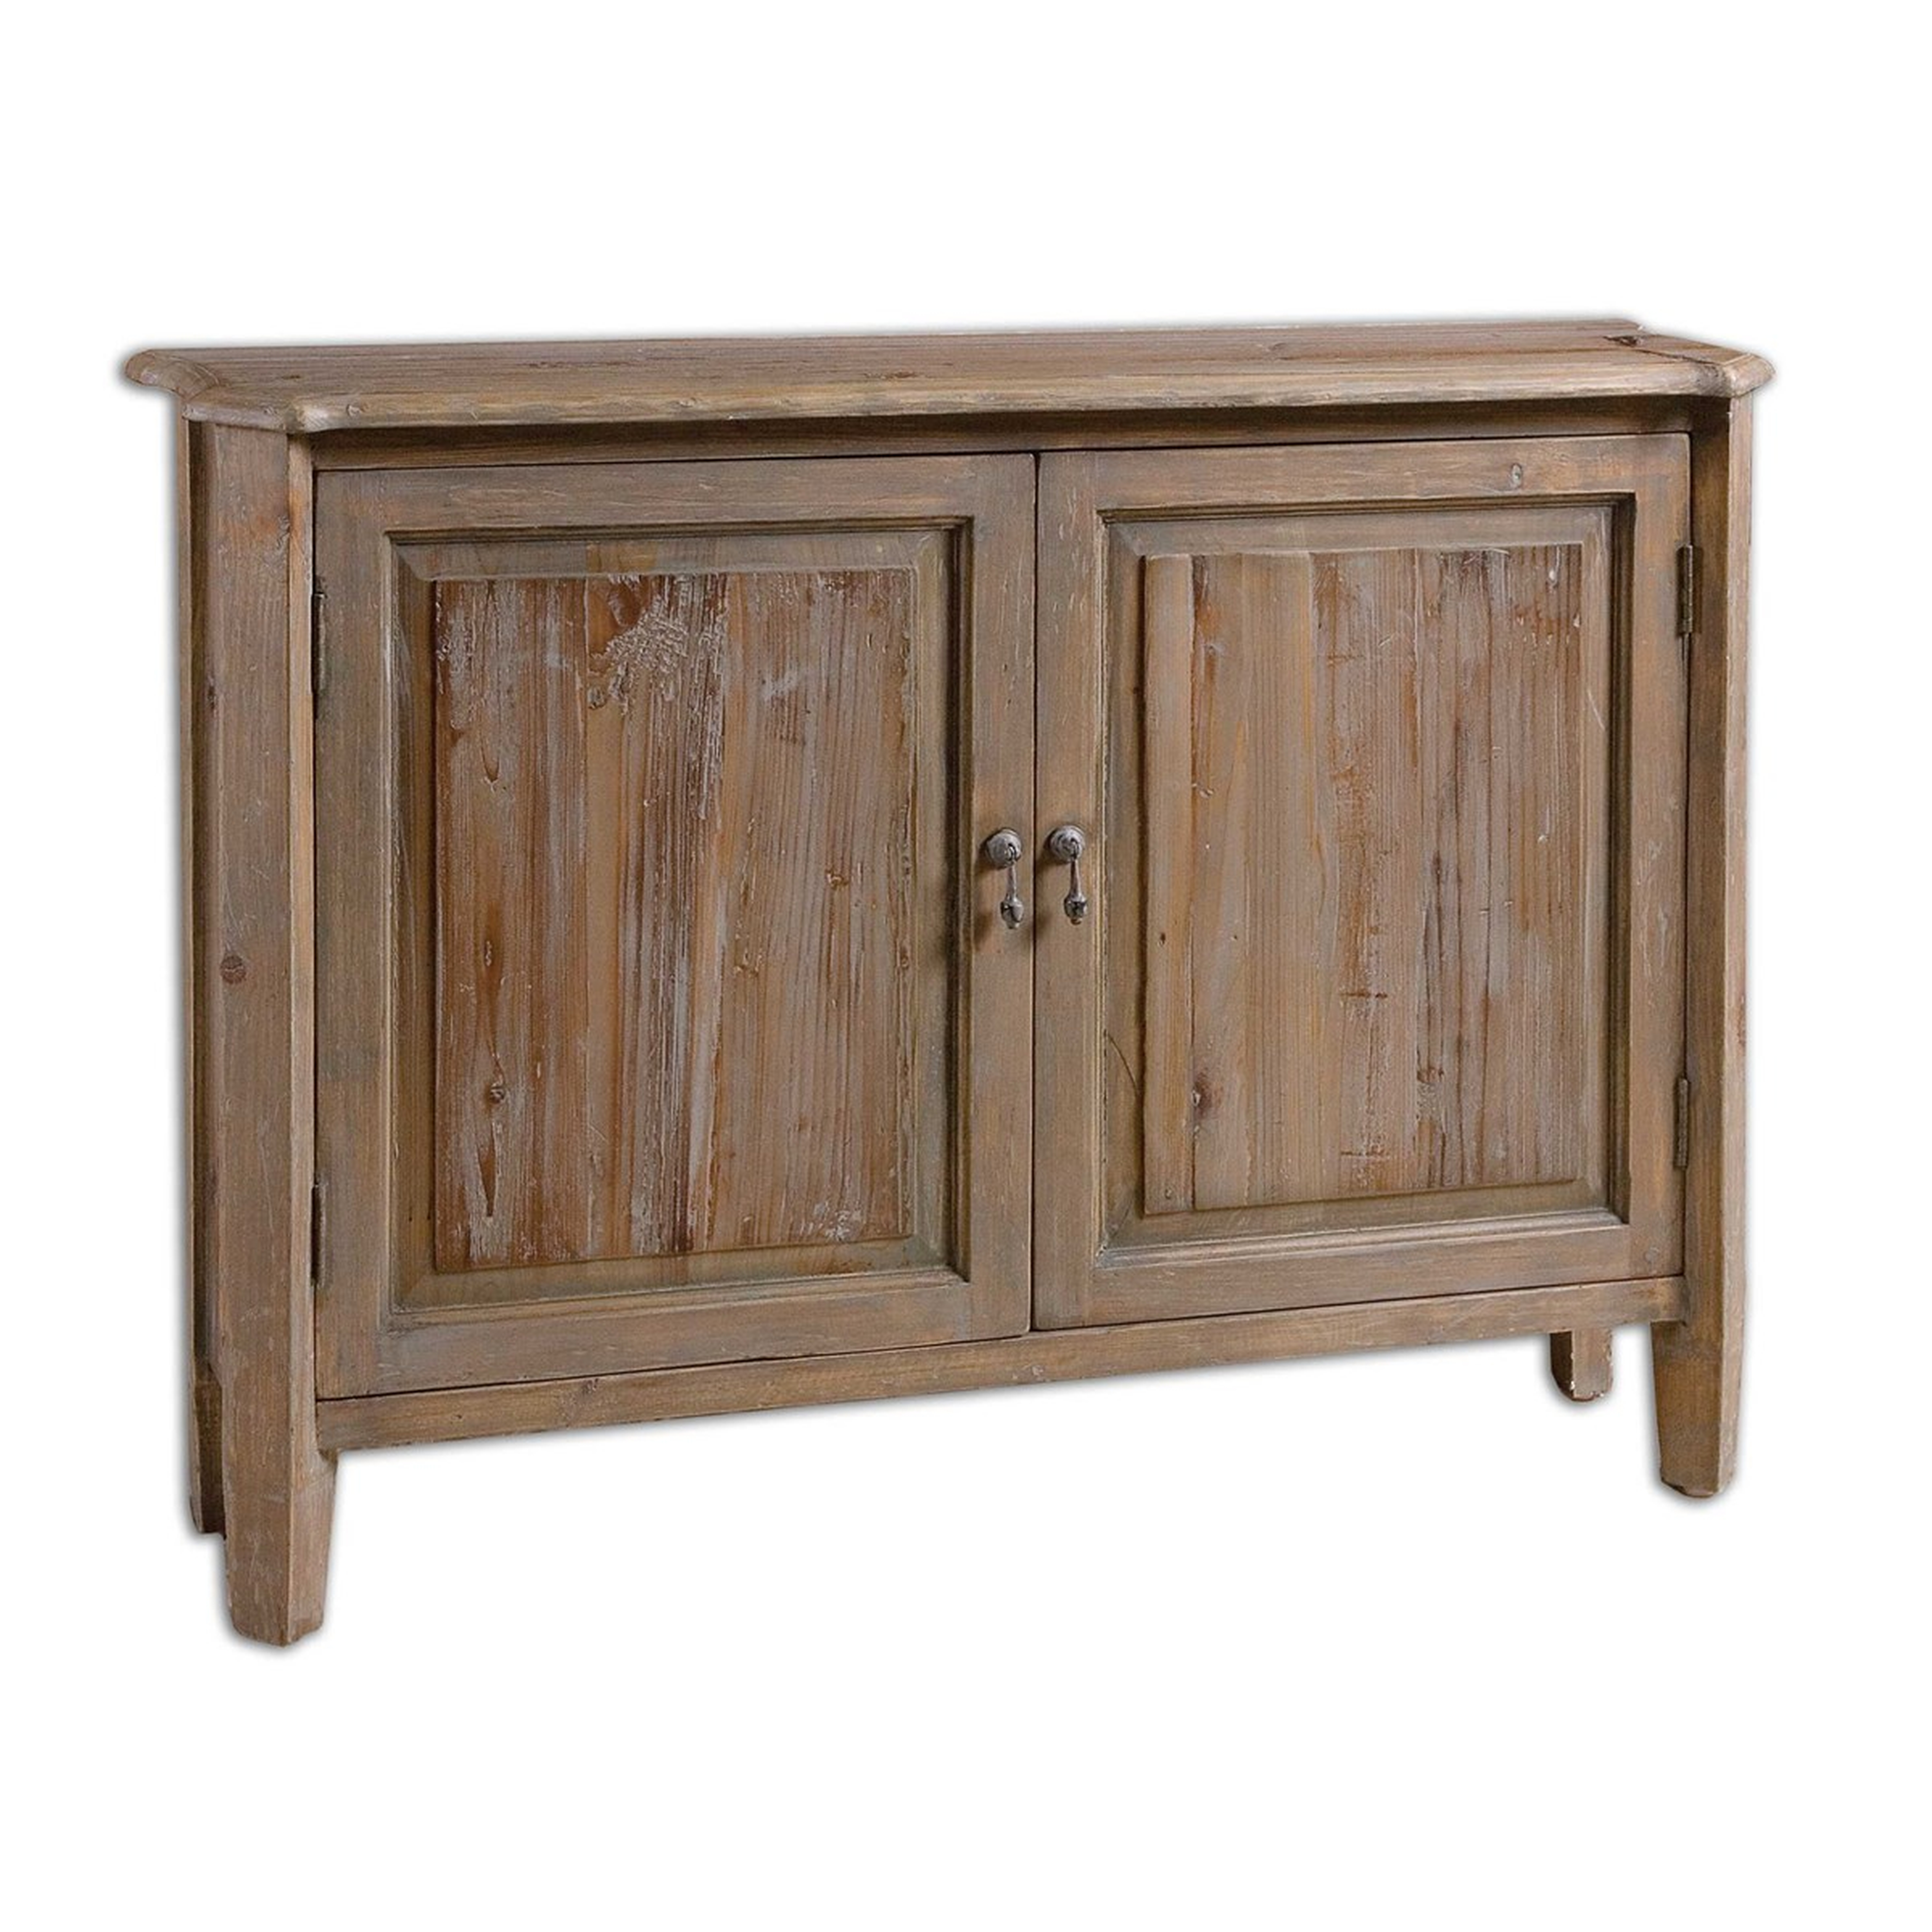 Altair Reclaimed Wood Console Cabinet - Hudsonhill Foundry